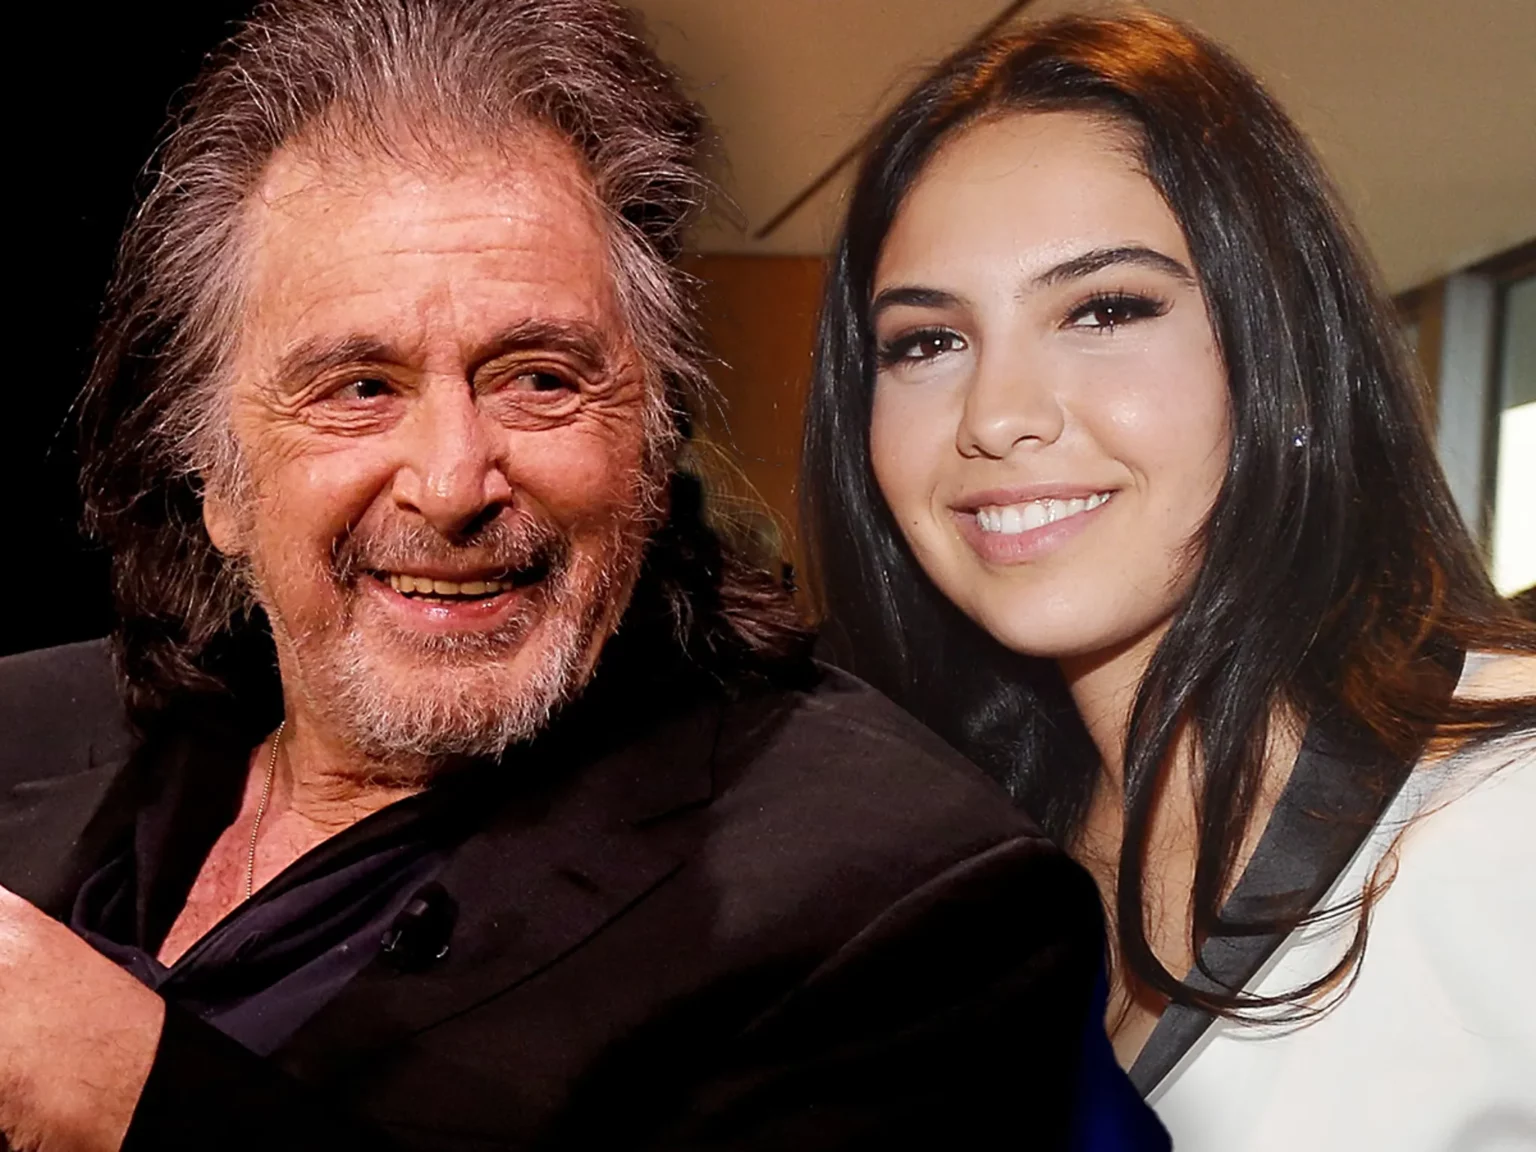 al-pacino-demanded-a-dna-test-for-his-girlfriend-to-determine-whether-the-baby-was-his-or